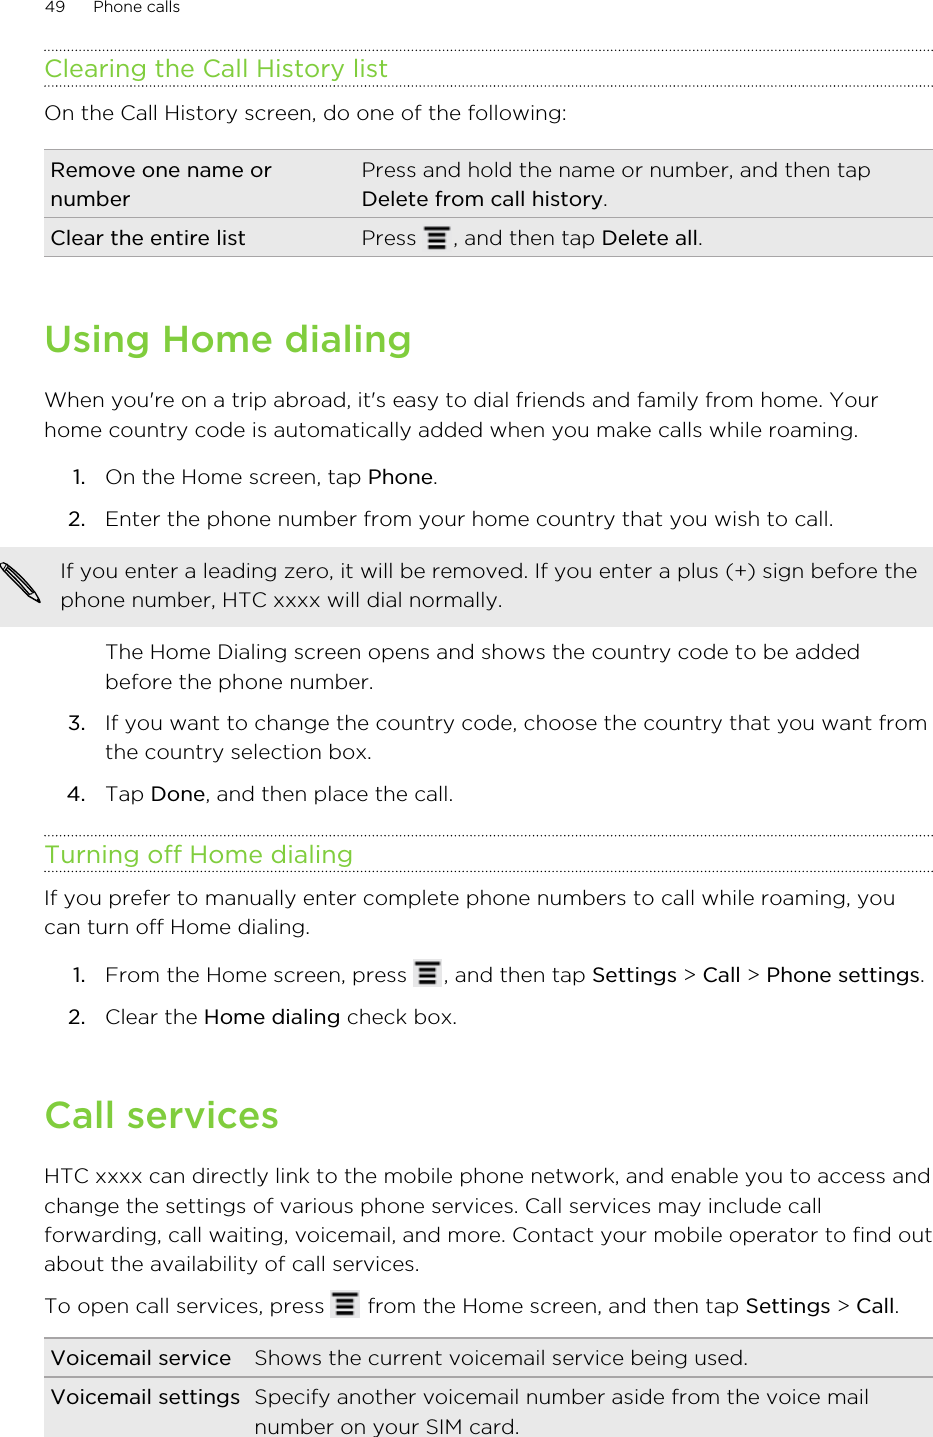 Clearing the Call History listOn the Call History screen, do one of the following:Remove one name ornumberPress and hold the name or number, and then tapDelete from call history.Clear the entire list Press  , and then tap Delete all.Using Home dialingWhen you&apos;re on a trip abroad, it&apos;s easy to dial friends and family from home. Yourhome country code is automatically added when you make calls while roaming.1. On the Home screen, tap Phone.2. Enter the phone number from your home country that you wish to call. If you enter a leading zero, it will be removed. If you enter a plus (+) sign before thephone number, HTC xxxx will dial normally.The Home Dialing screen opens and shows the country code to be addedbefore the phone number.3. If you want to change the country code, choose the country that you want fromthe country selection box.4. Tap Done, and then place the call.Turning off Home dialingIf you prefer to manually enter complete phone numbers to call while roaming, youcan turn off Home dialing.1. From the Home screen, press  , and then tap Settings &gt; Call &gt; Phone settings.2. Clear the Home dialing check box.Call servicesHTC xxxx can directly link to the mobile phone network, and enable you to access andchange the settings of various phone services. Call services may include callforwarding, call waiting, voicemail, and more. Contact your mobile operator to find outabout the availability of call services.To open call services, press   from the Home screen, and then tap Settings &gt; Call.Voicemail service Shows the current voicemail service being used.Voicemail settings Specify another voicemail number aside from the voice mailnumber on your SIM card.49 Phone calls